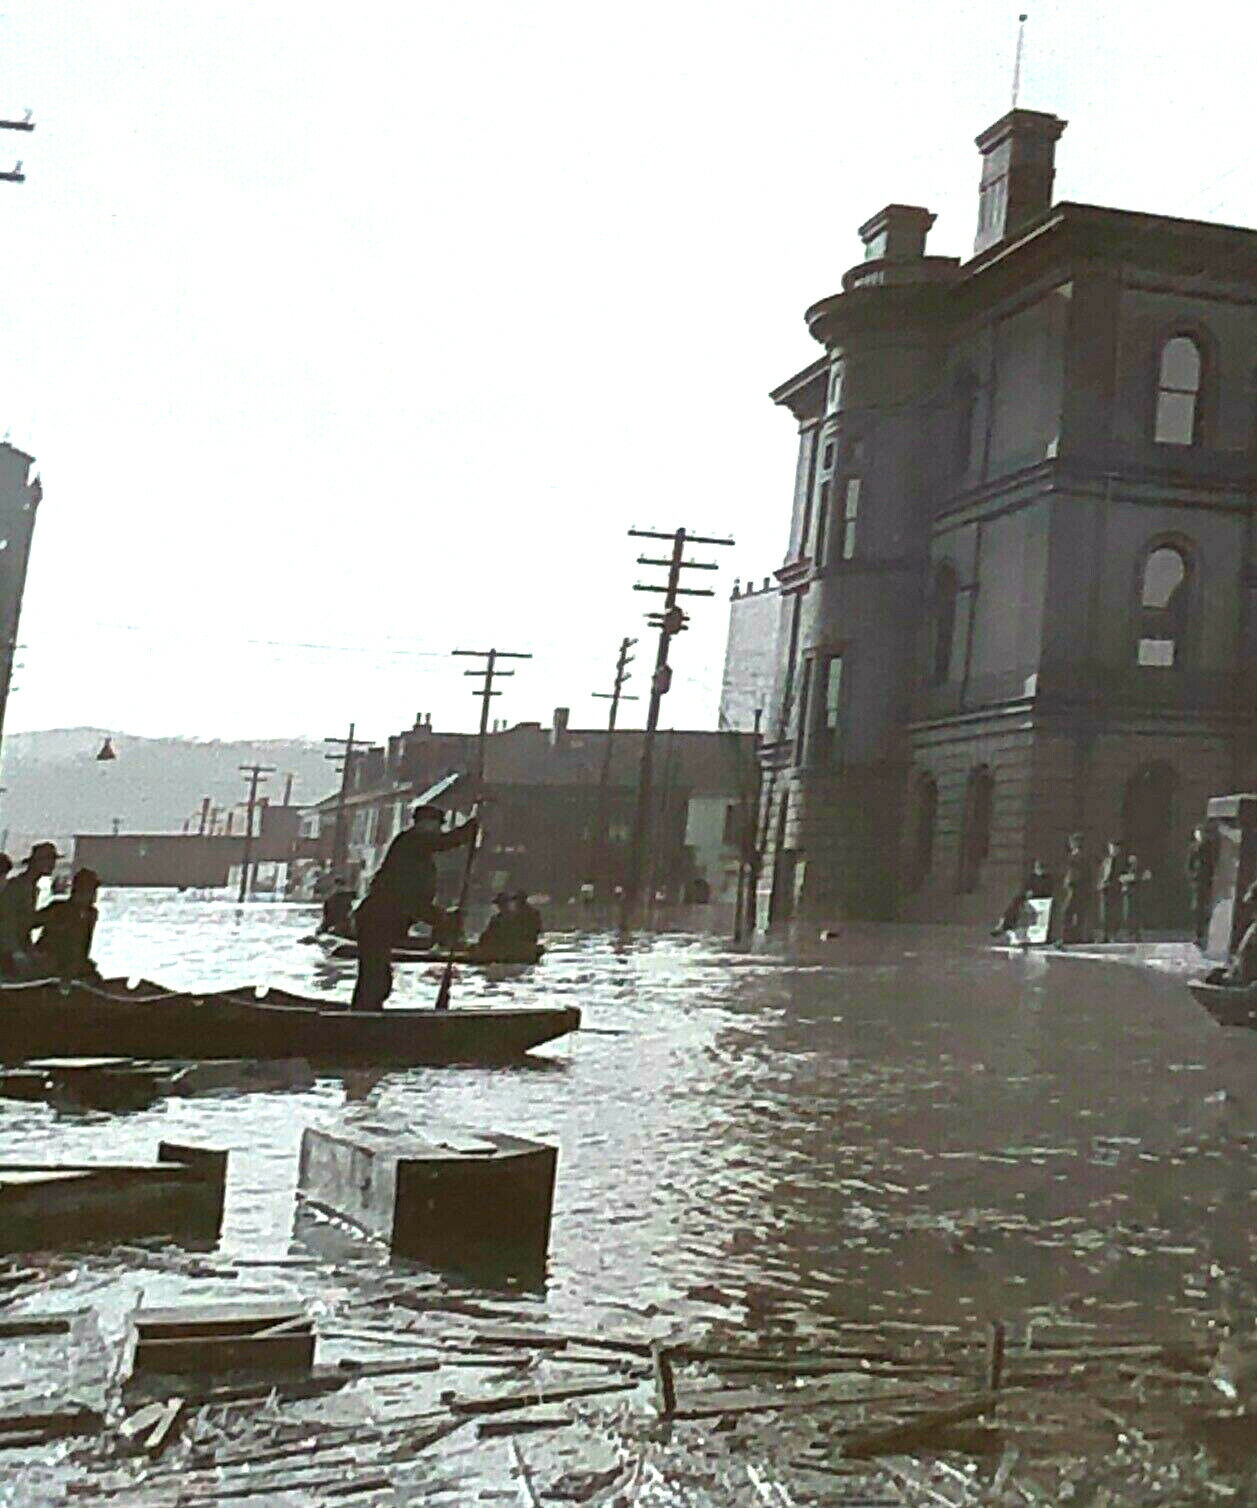 1907 Flood, Submerged Streets Photo Negative, Ohio, WV, PA, Disaster, River